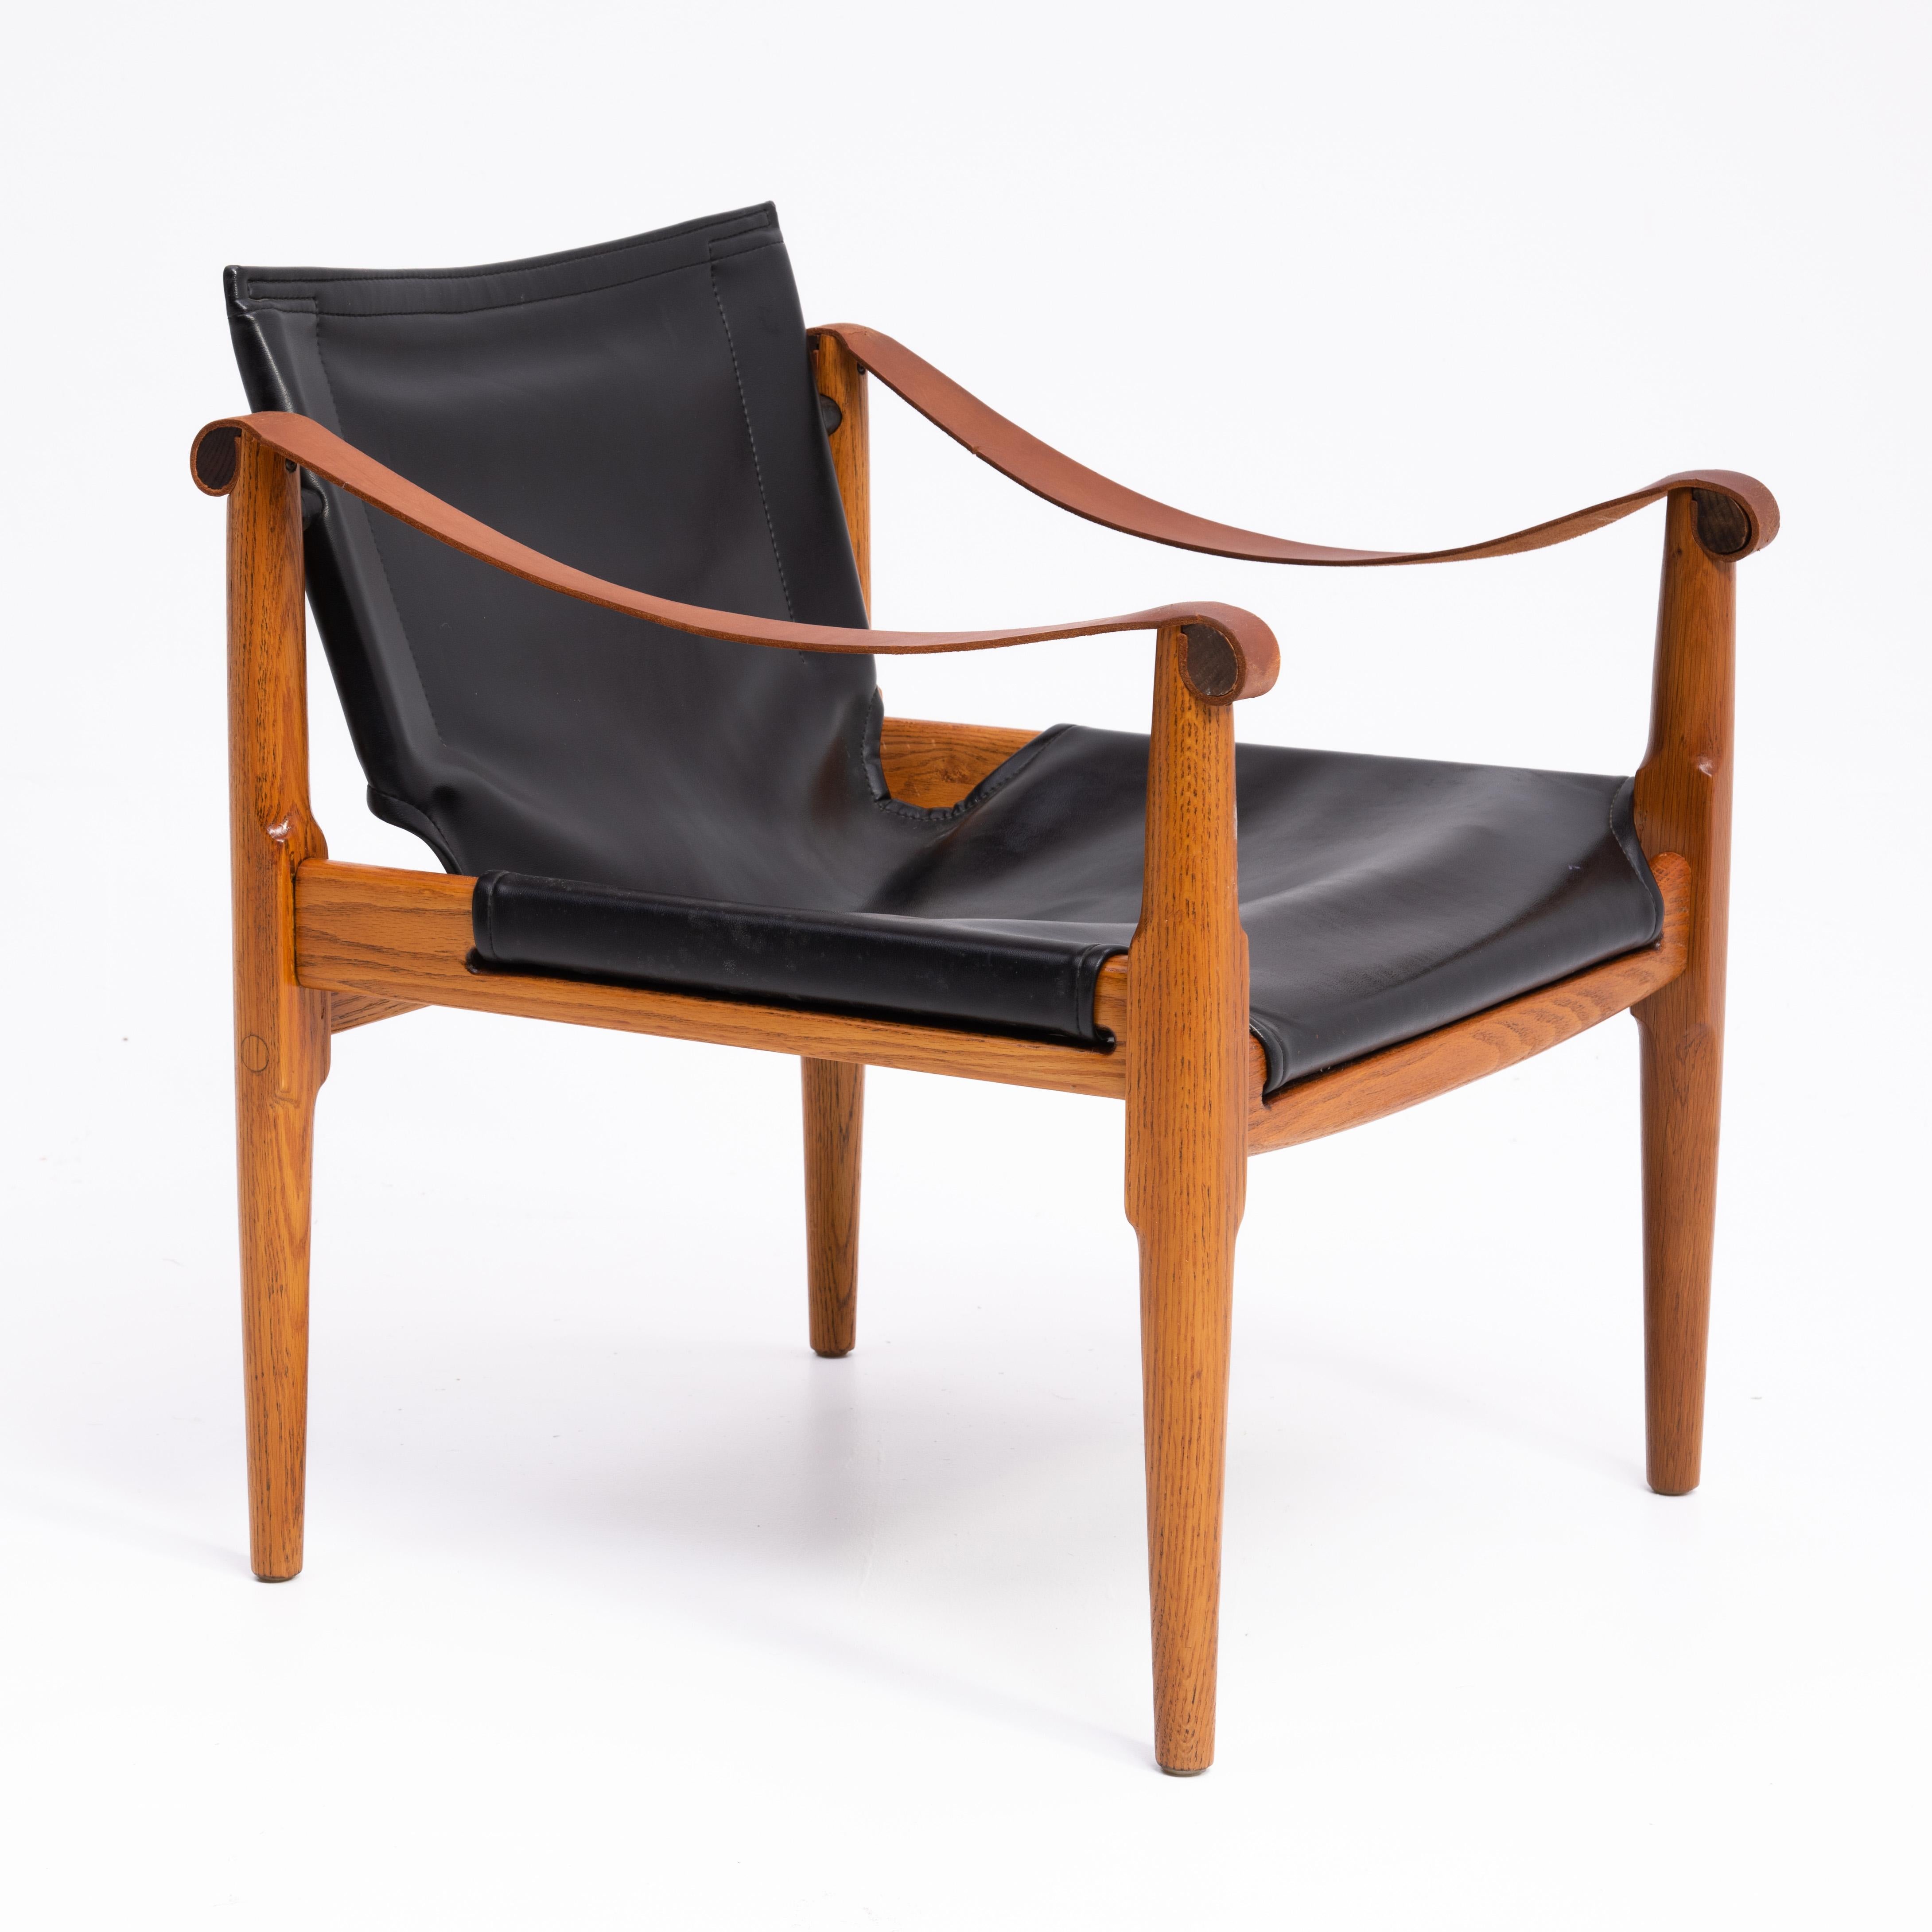 Douglas Heaslett Brown Saltman Safari Sling Chair 1960s In Good Condition For Sale In Forest Grove, PA